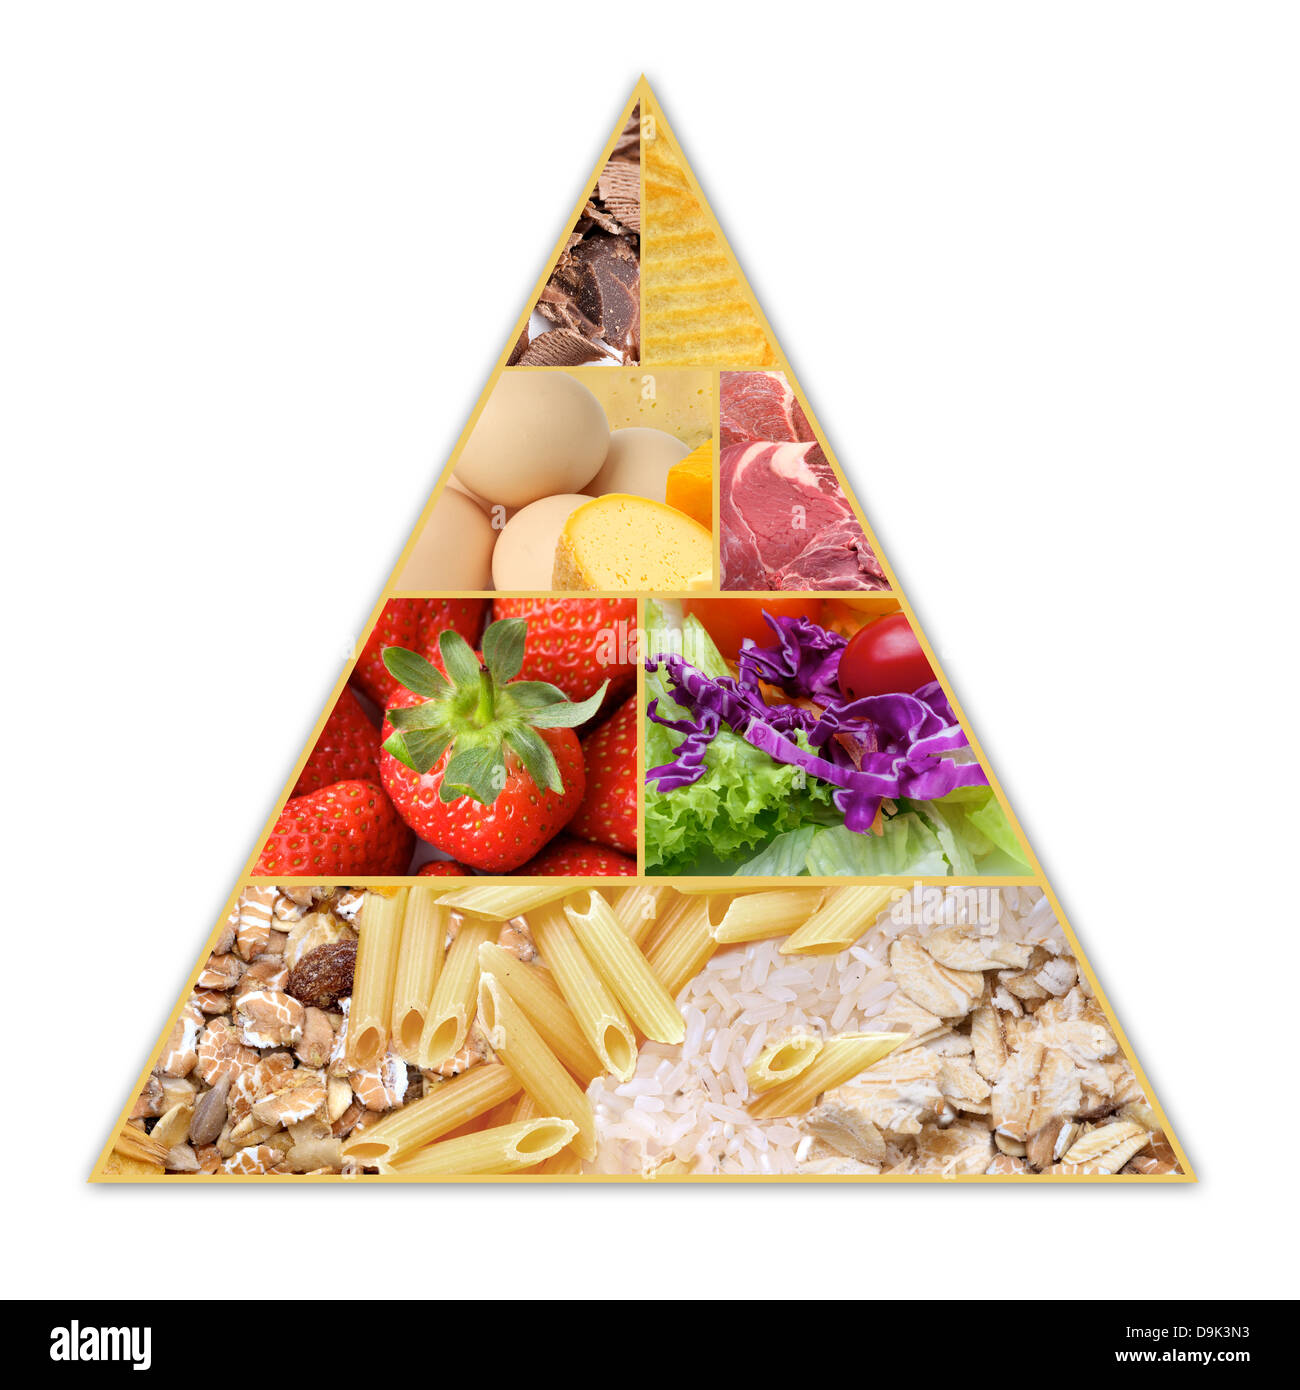 A pyramid health guide for healthy diets Stock Photo